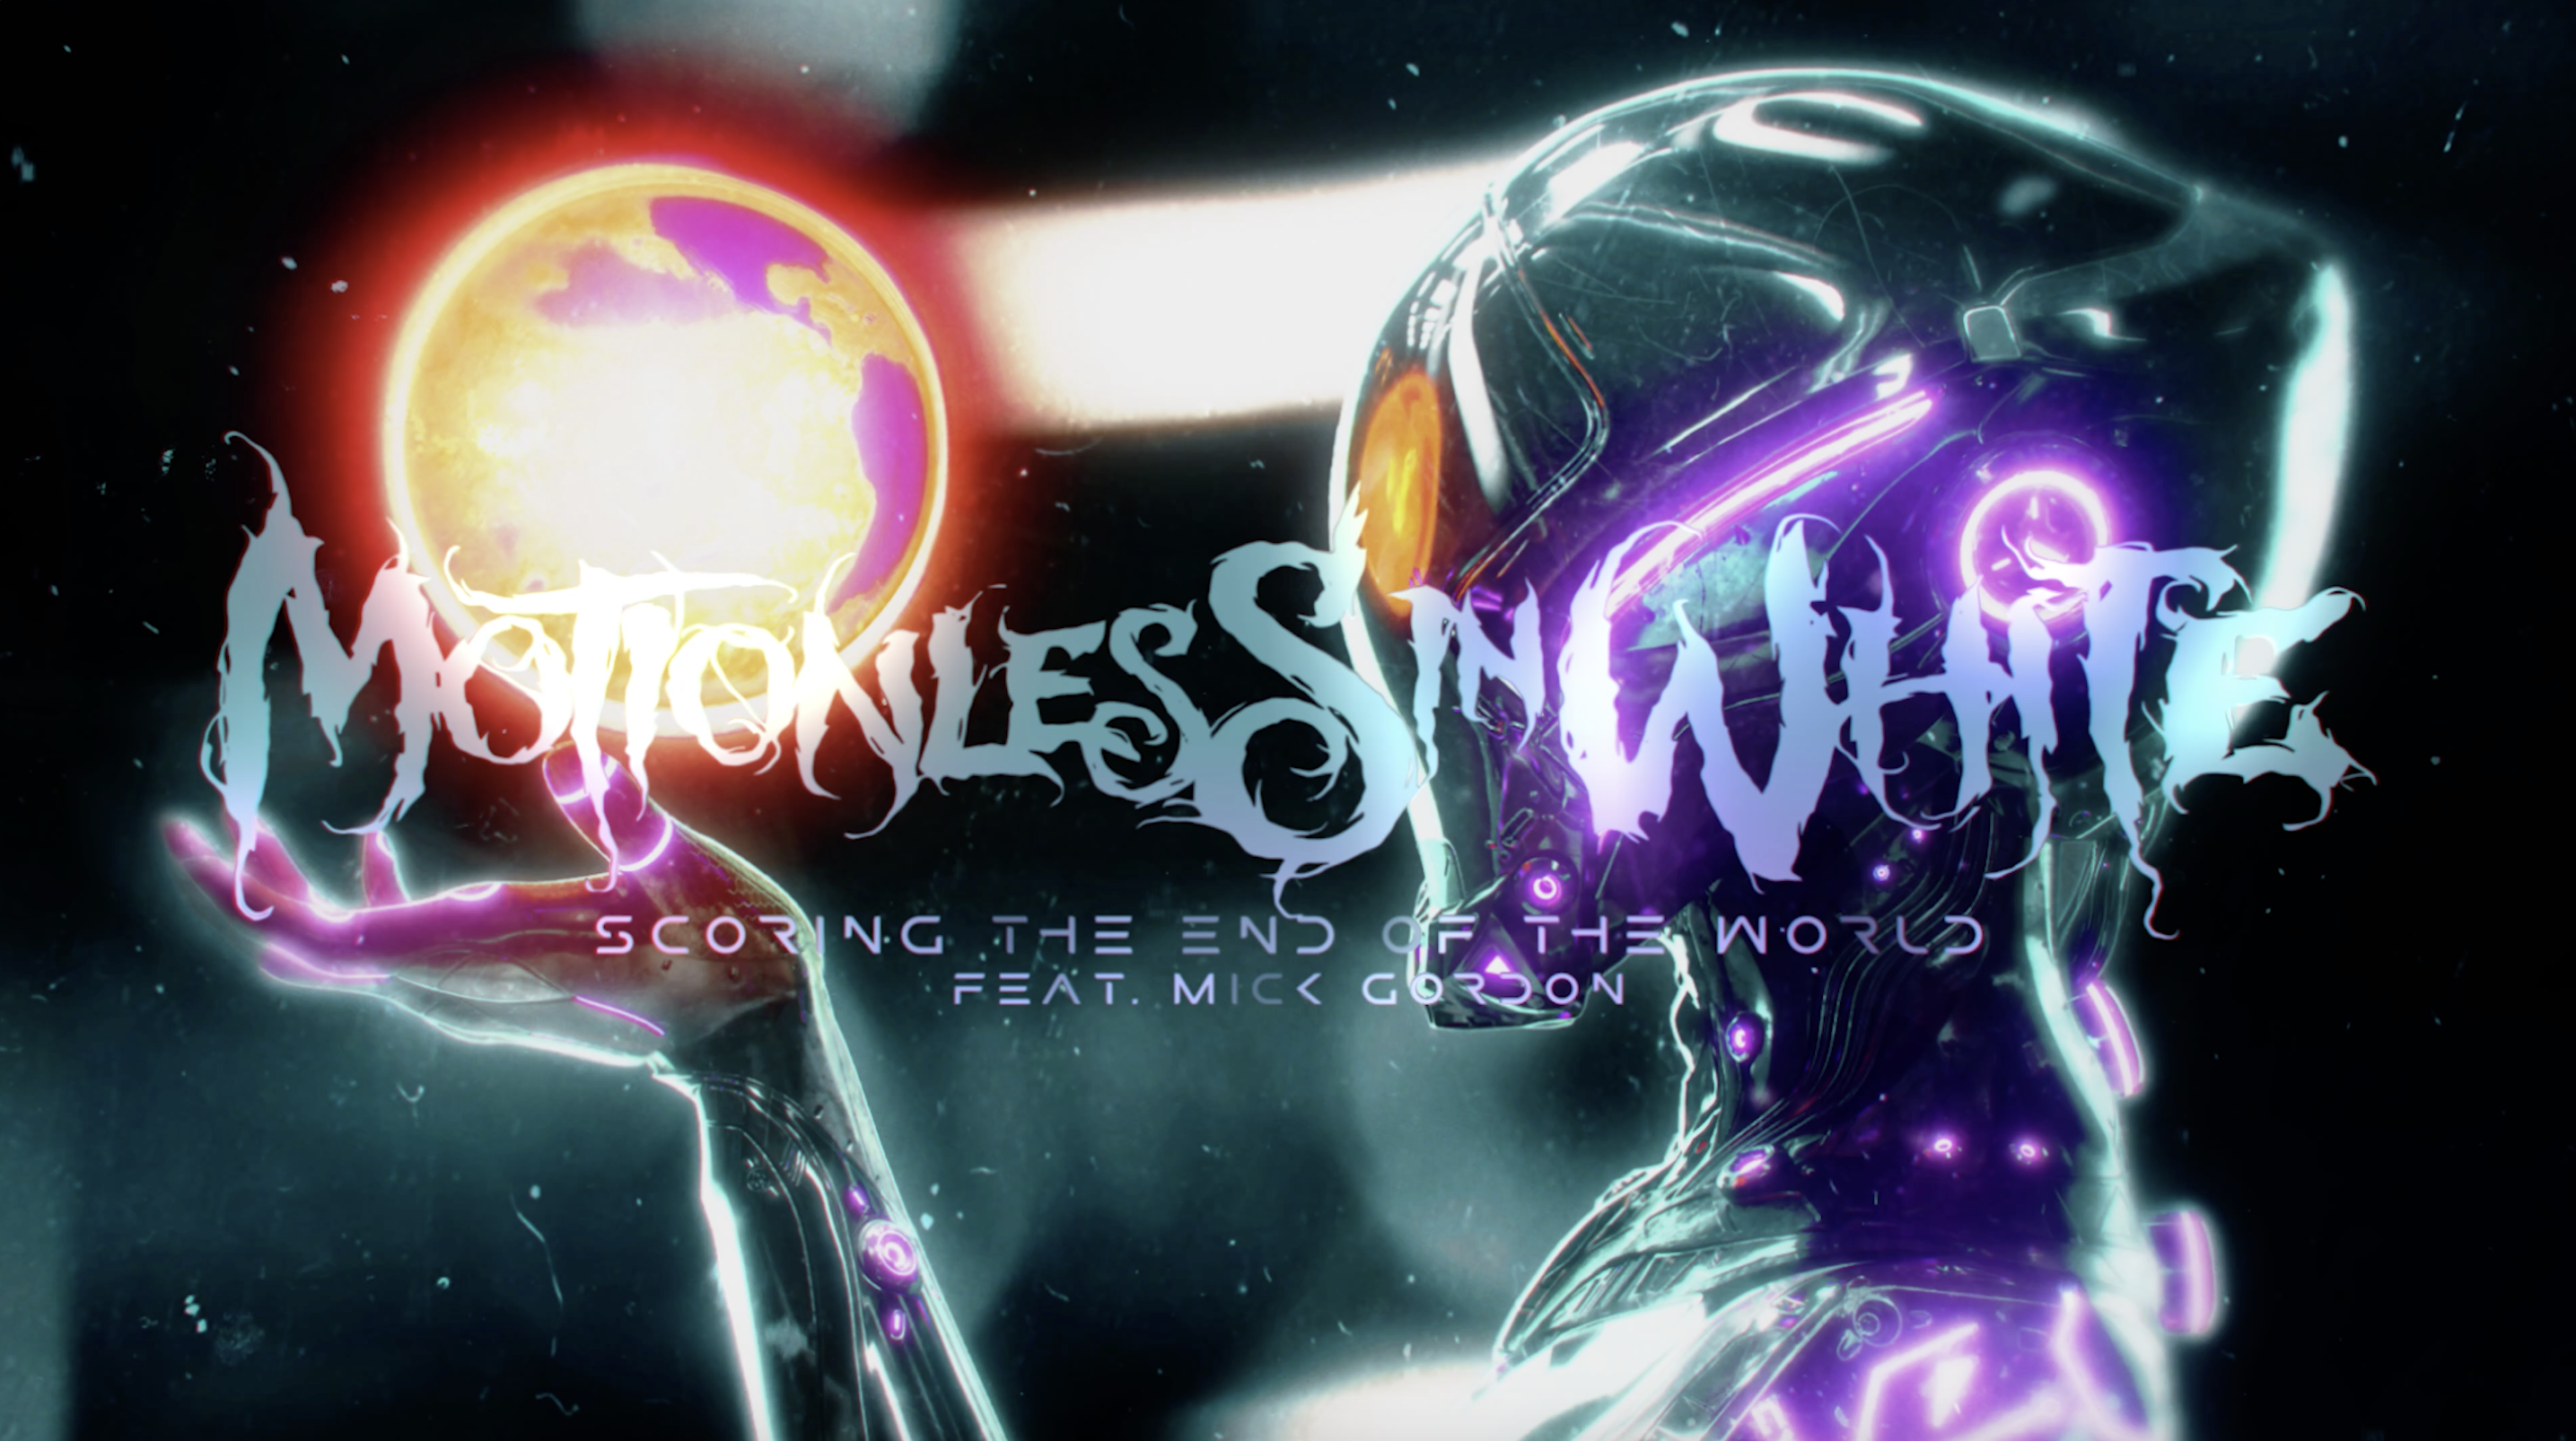 Motionless In White | Scoring The End Of The World